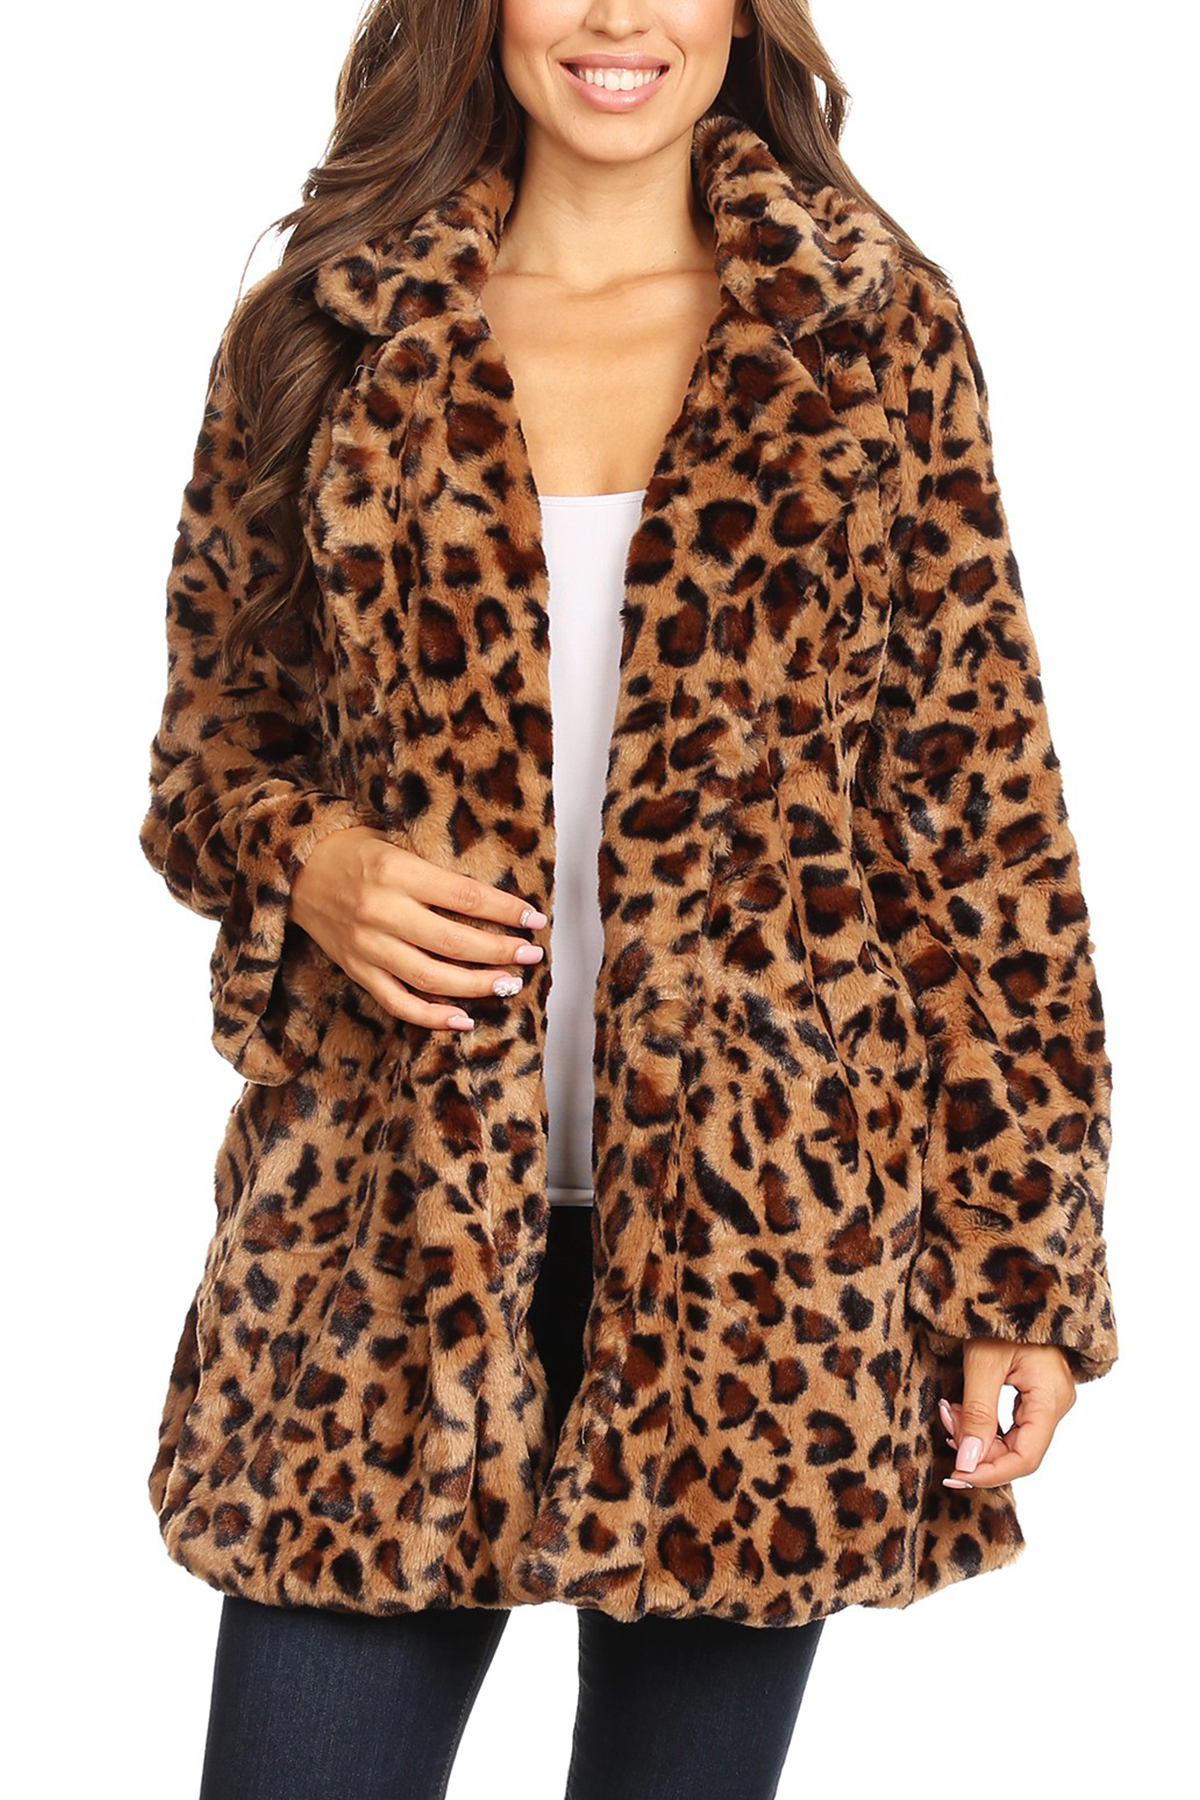 Moa Collection Women's Casual Leopard Printed Faux Fur with Pockets Parka Jacket Outwear